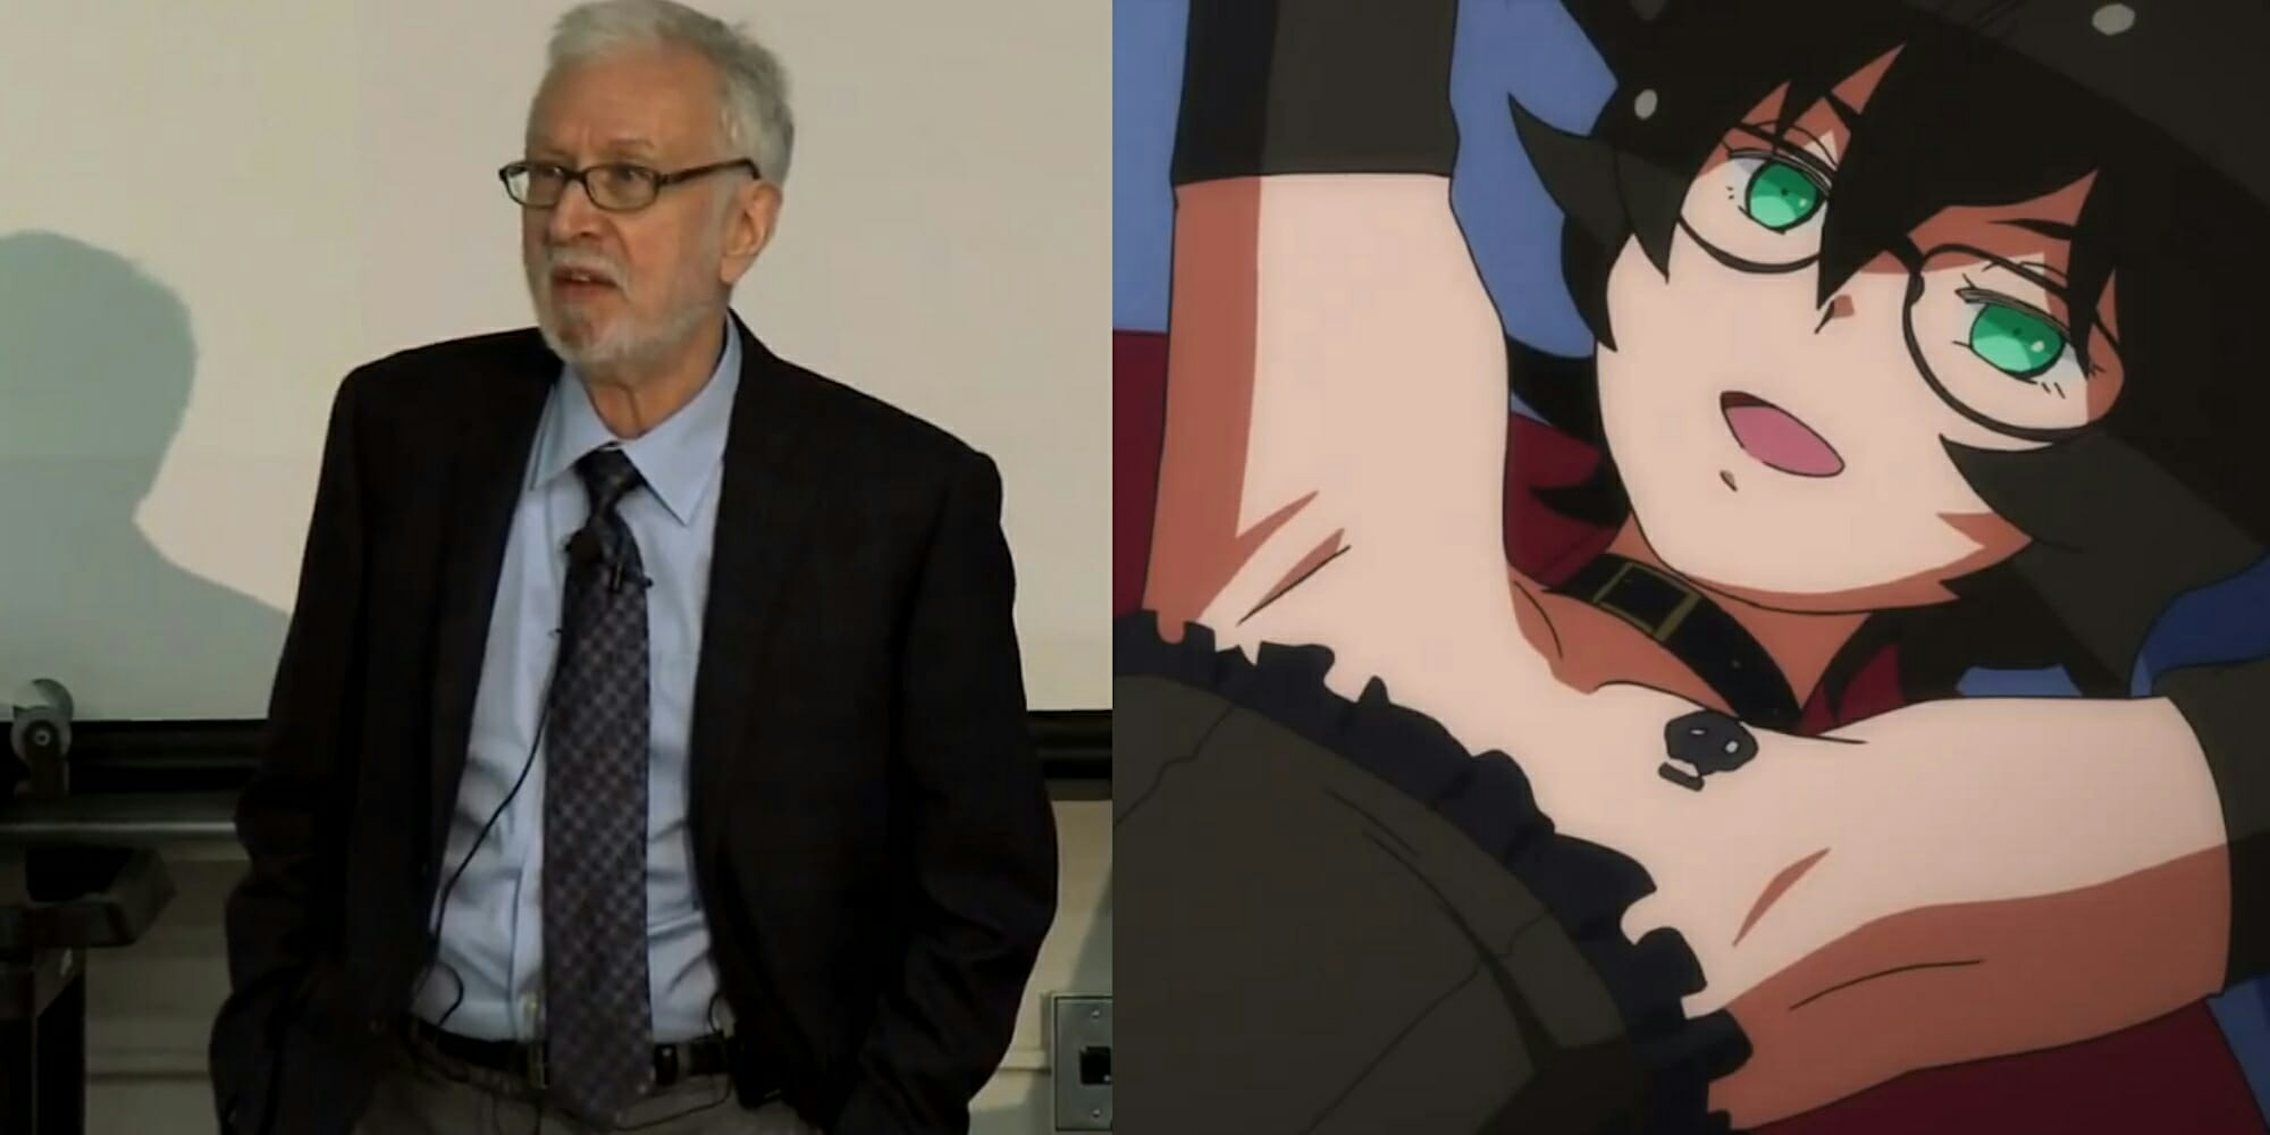 Dr. Ray Blanchard went viral after endorsing a theory arguing anime makes people transition genders.